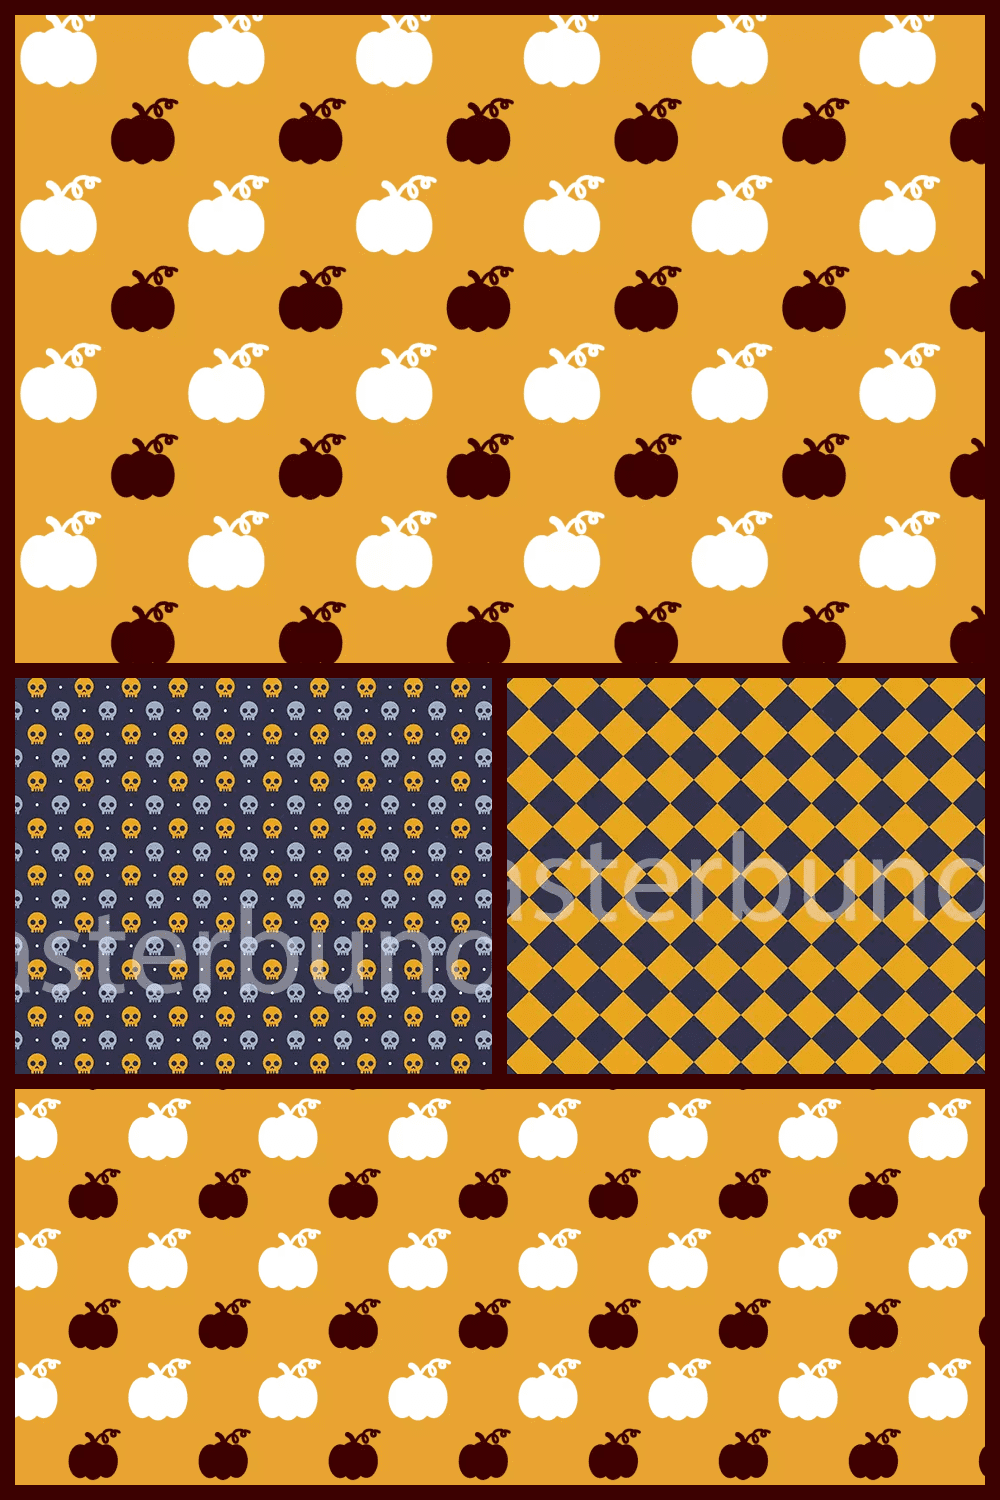 Collage of silhouettes of pumpkins, skulls in a geometric pattern on a blue and orange background.